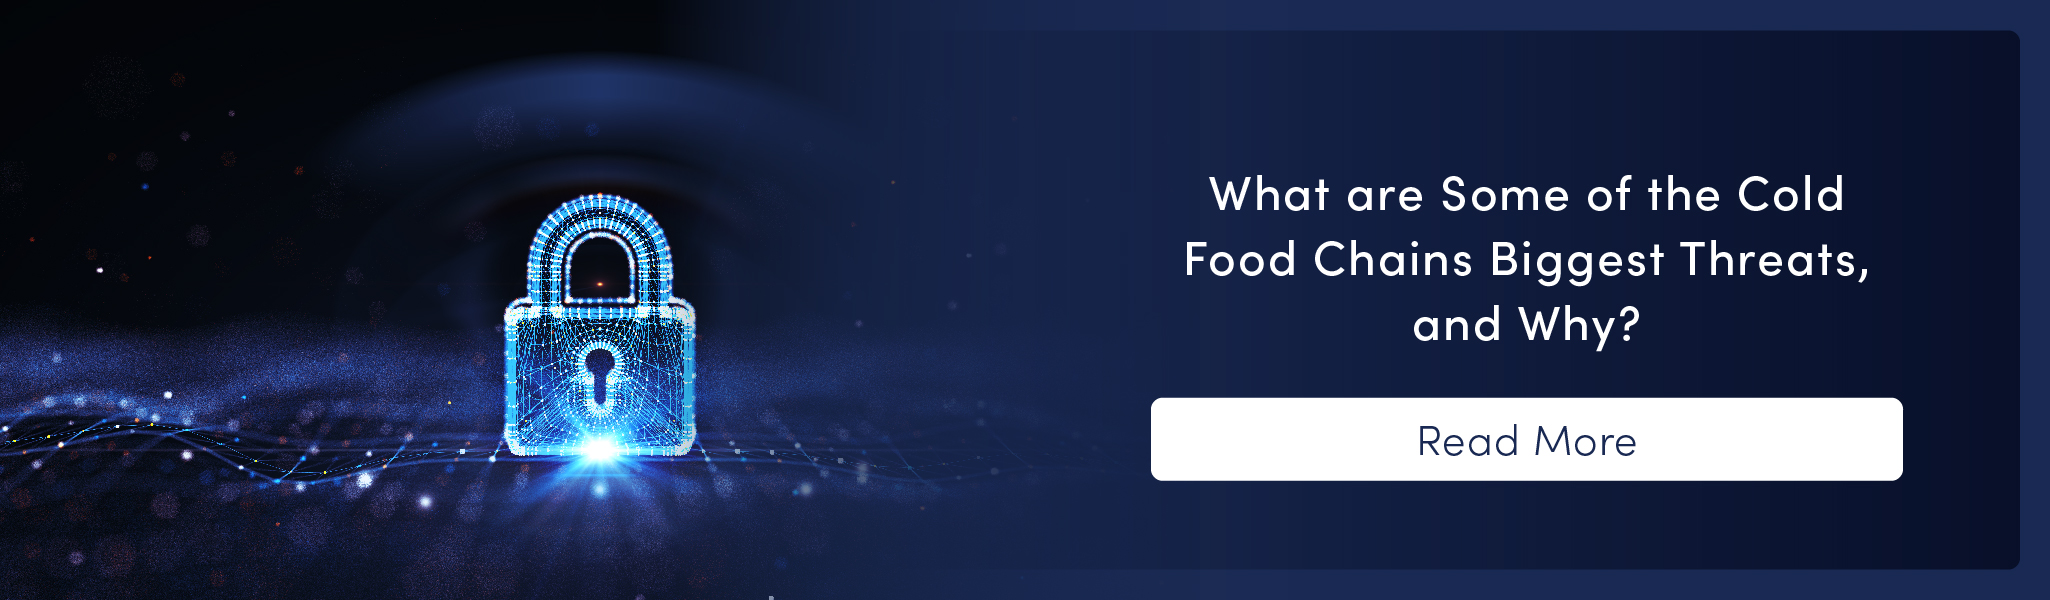 What are Some of the Cold Food Chains Biggest Threats, and Why?